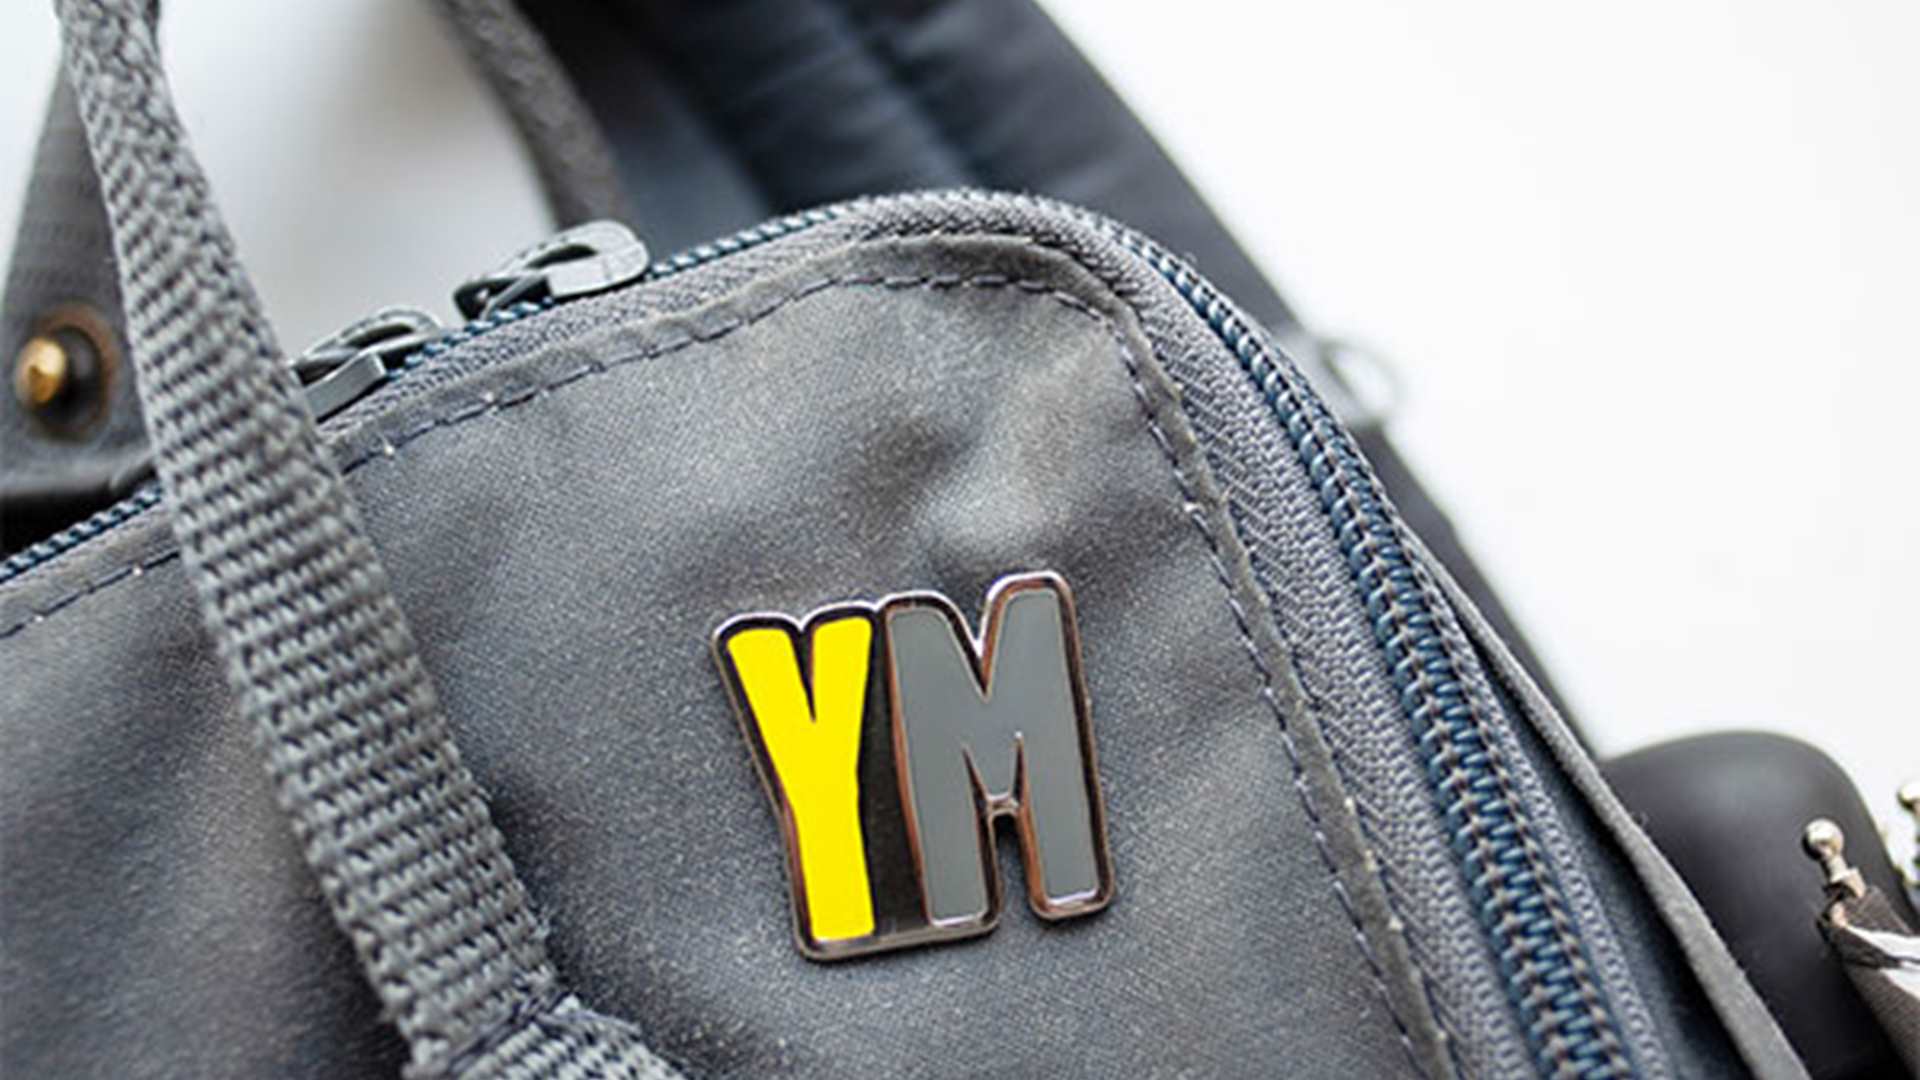 YoungMinds pin badge on bag